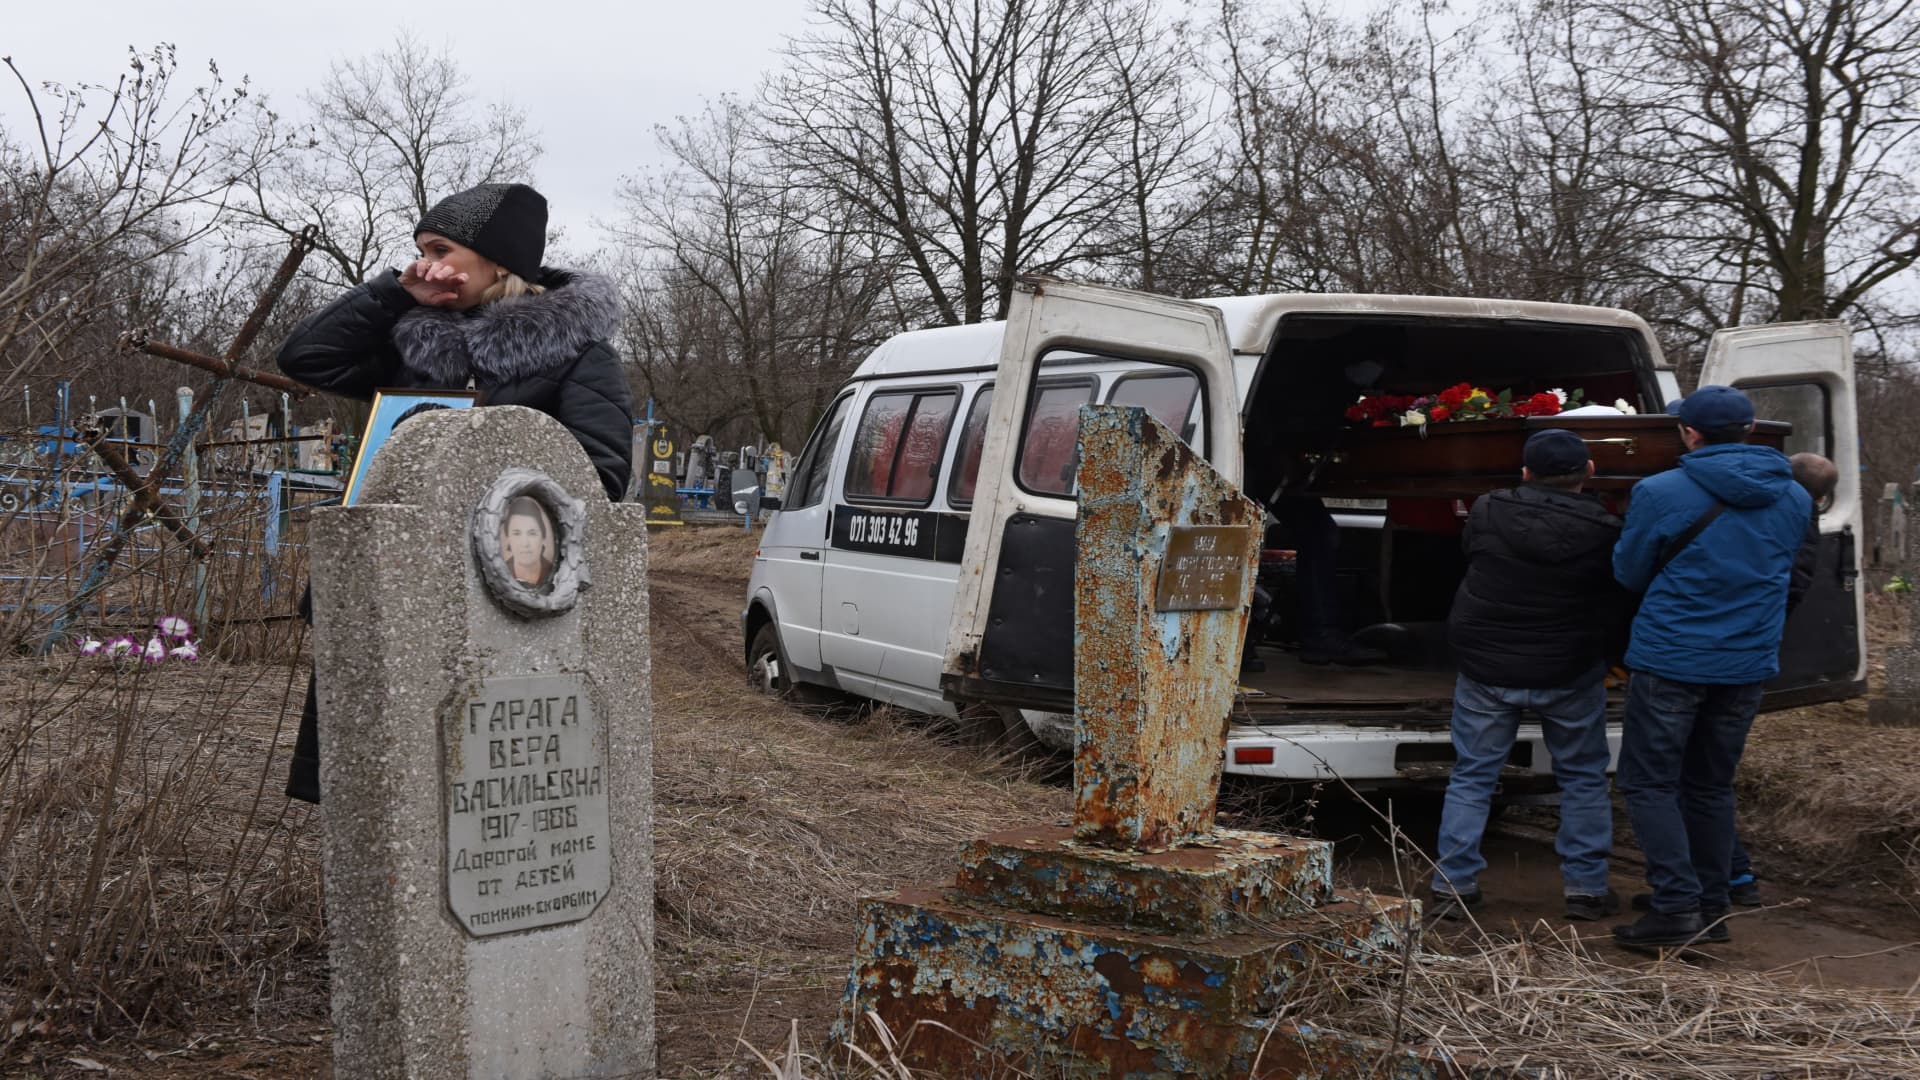 Men unload the coffin from a vehicle during a funeral of school teachers Yelena Ivanova and Yelena Kudrik, who were killed by shelling, at a cemetery in the separatist-controlled town of Horlivka (Gorlovka) in the Donetsk region, Ukraine, February 28, 2022. 